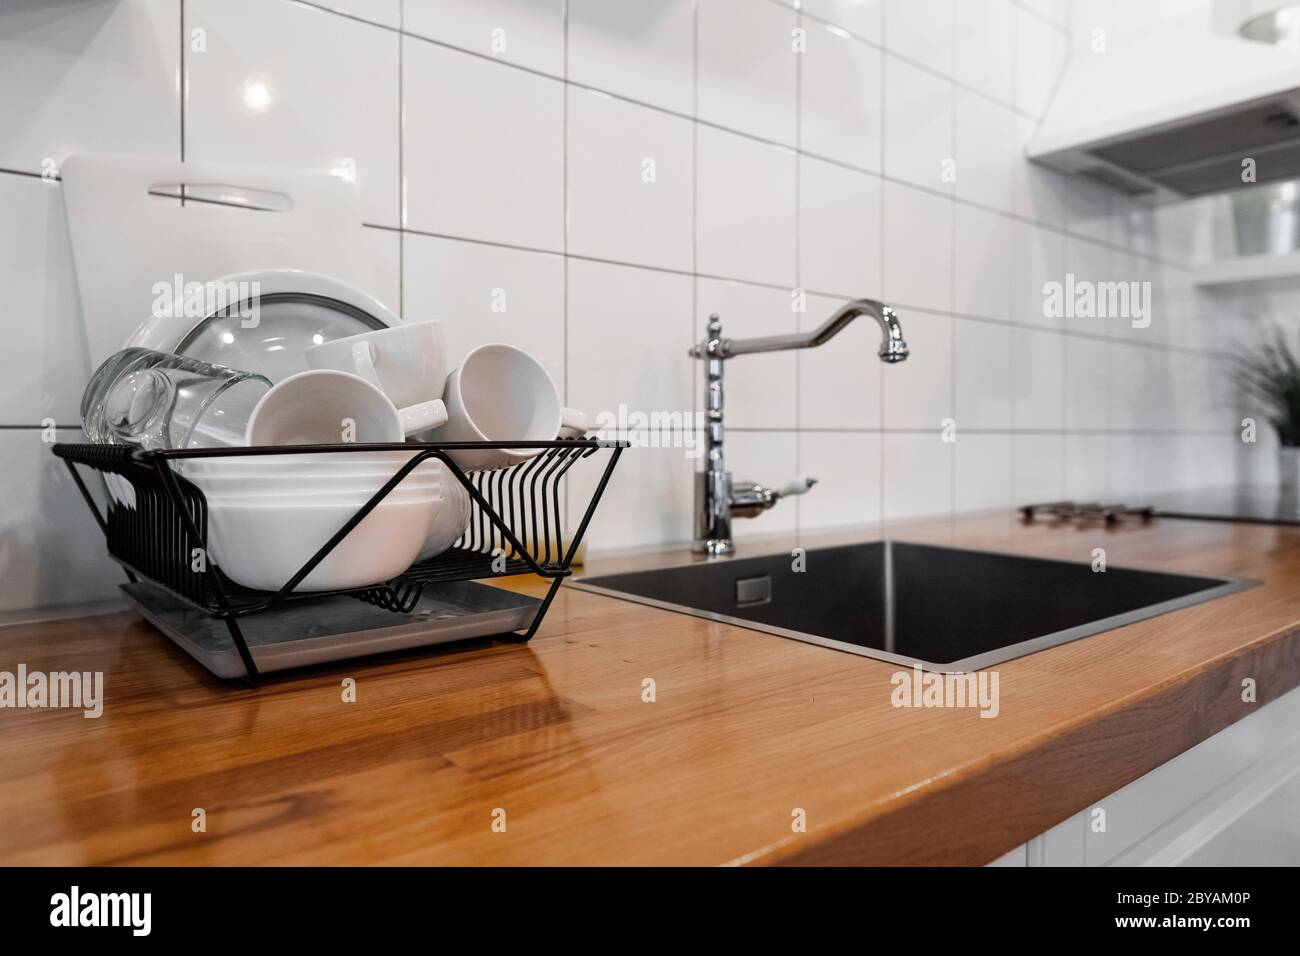 https://c8.alamy.com/comp/2BYAM0P/dish-rack-holds-many-dishes-and-cups-against-wooden-countertop-white-wall-tiles-sink-and-faucet-budget-and-lightweight-antimicrobial-dish-drainer-2BYAM0P.jpg